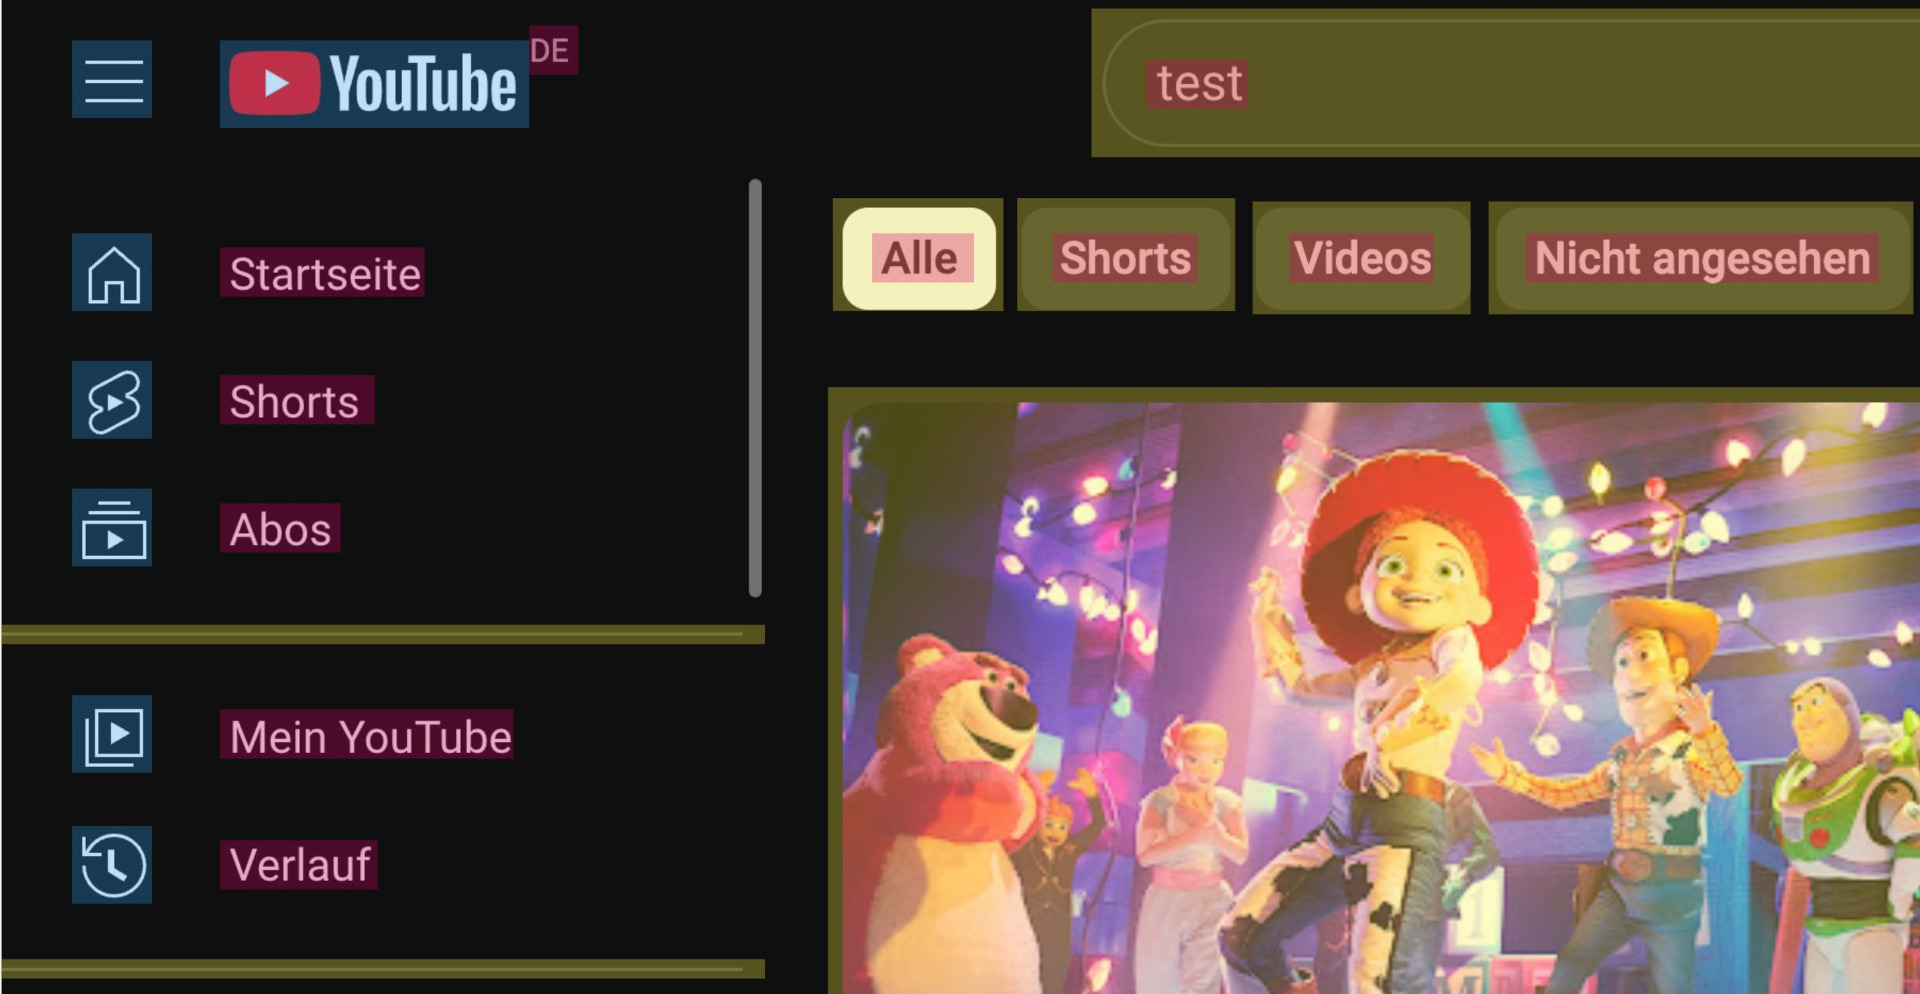 Youtube Web User Interface with highlighted panels, texts, and icons